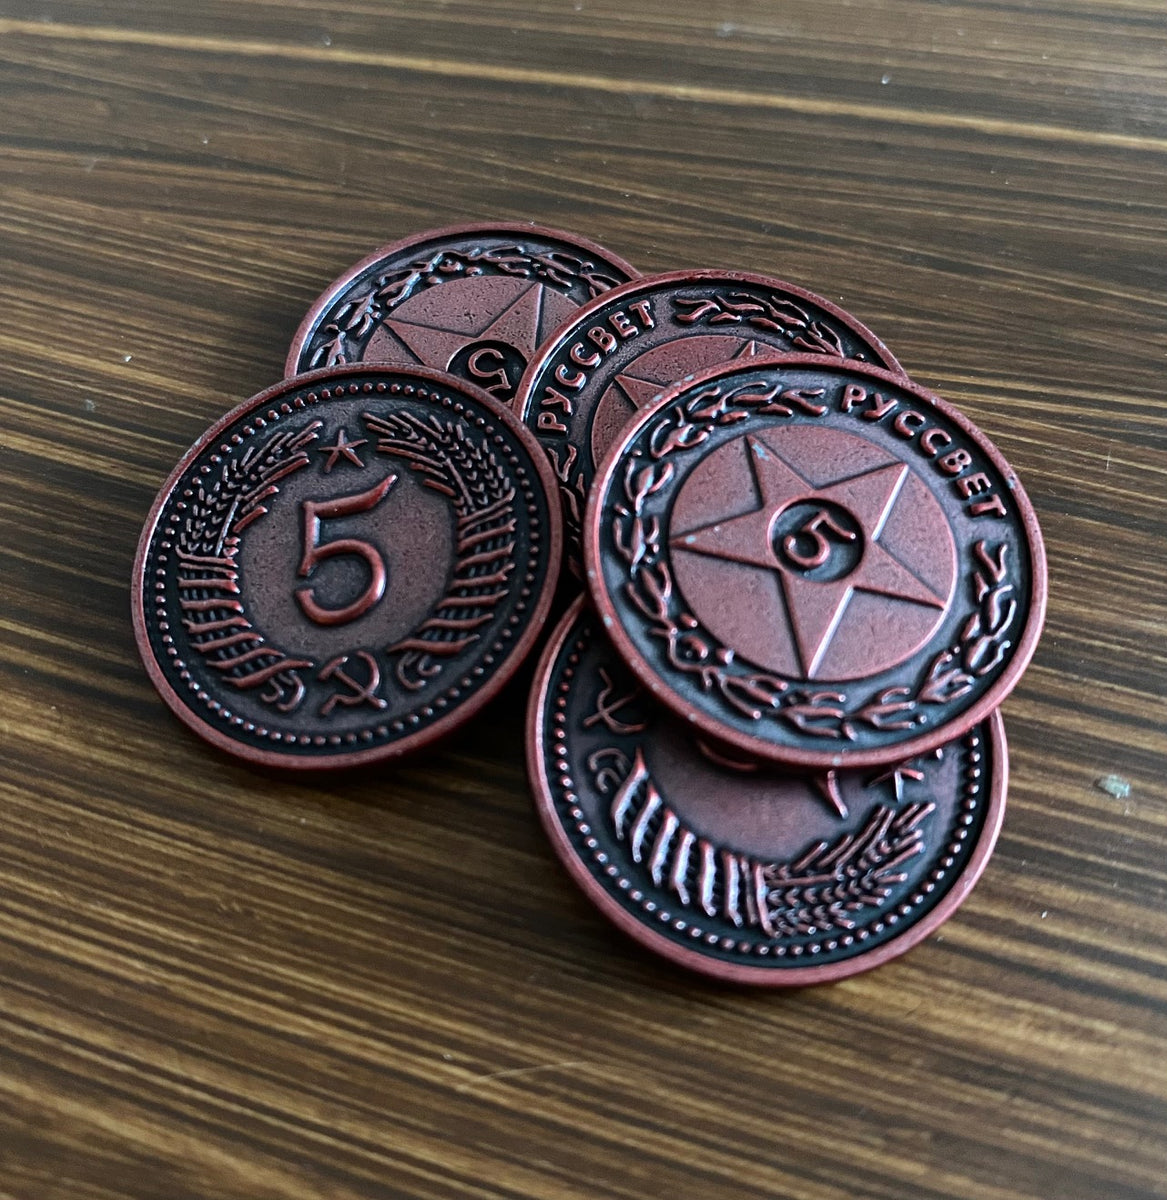 Red $5 Metal Coins (Expeditions and Scythe)